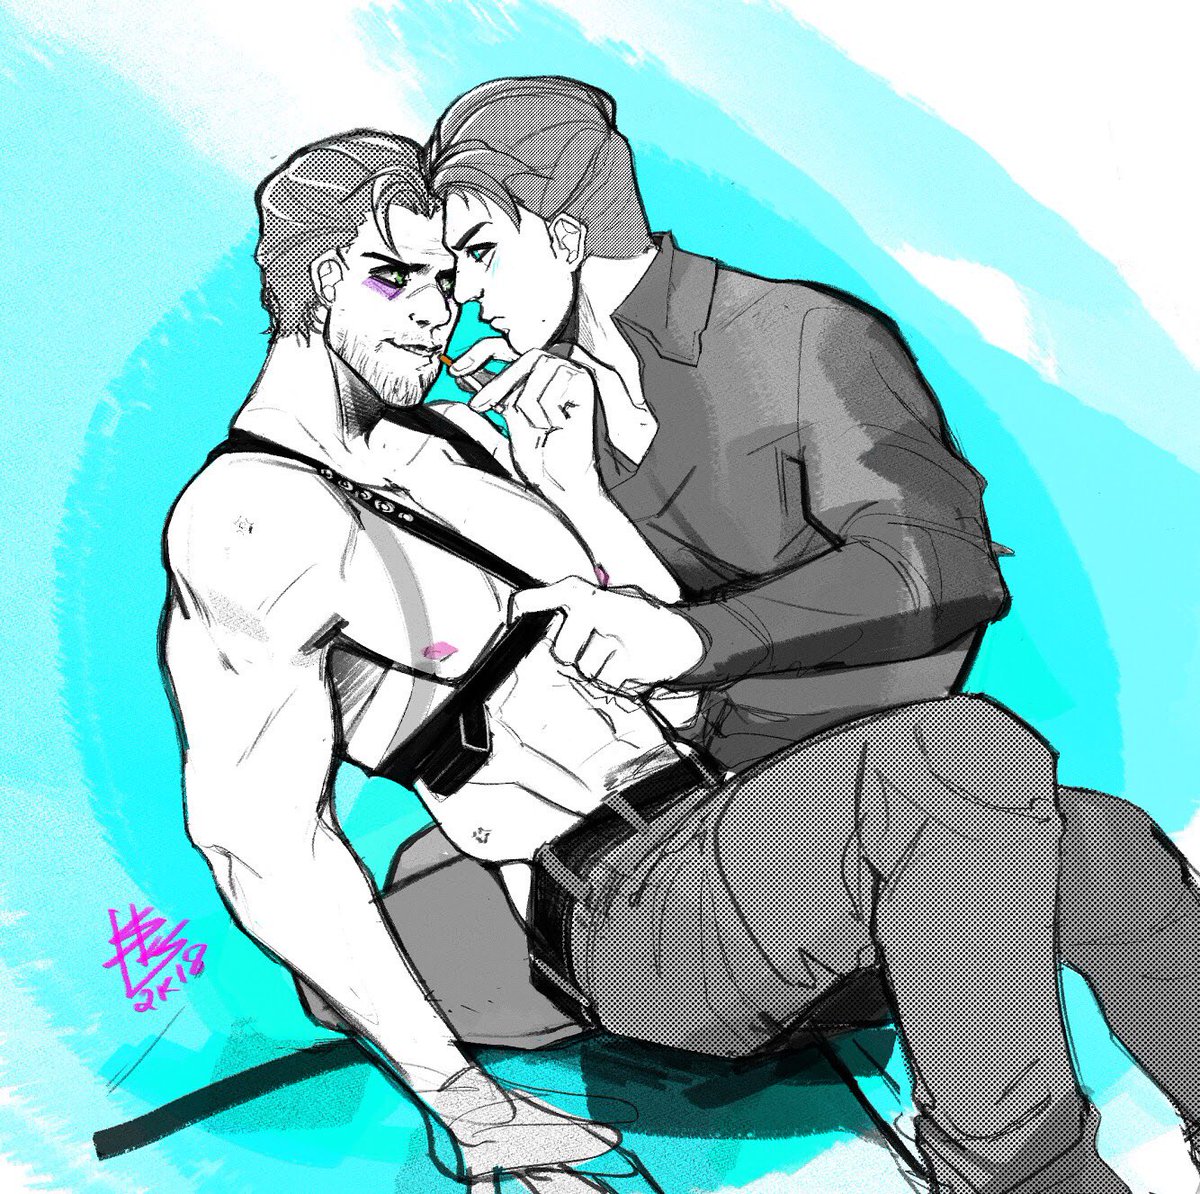 Gavin being an extra little gremlin #Reed900 #900gavin #DBH #DetroitBecomeH...